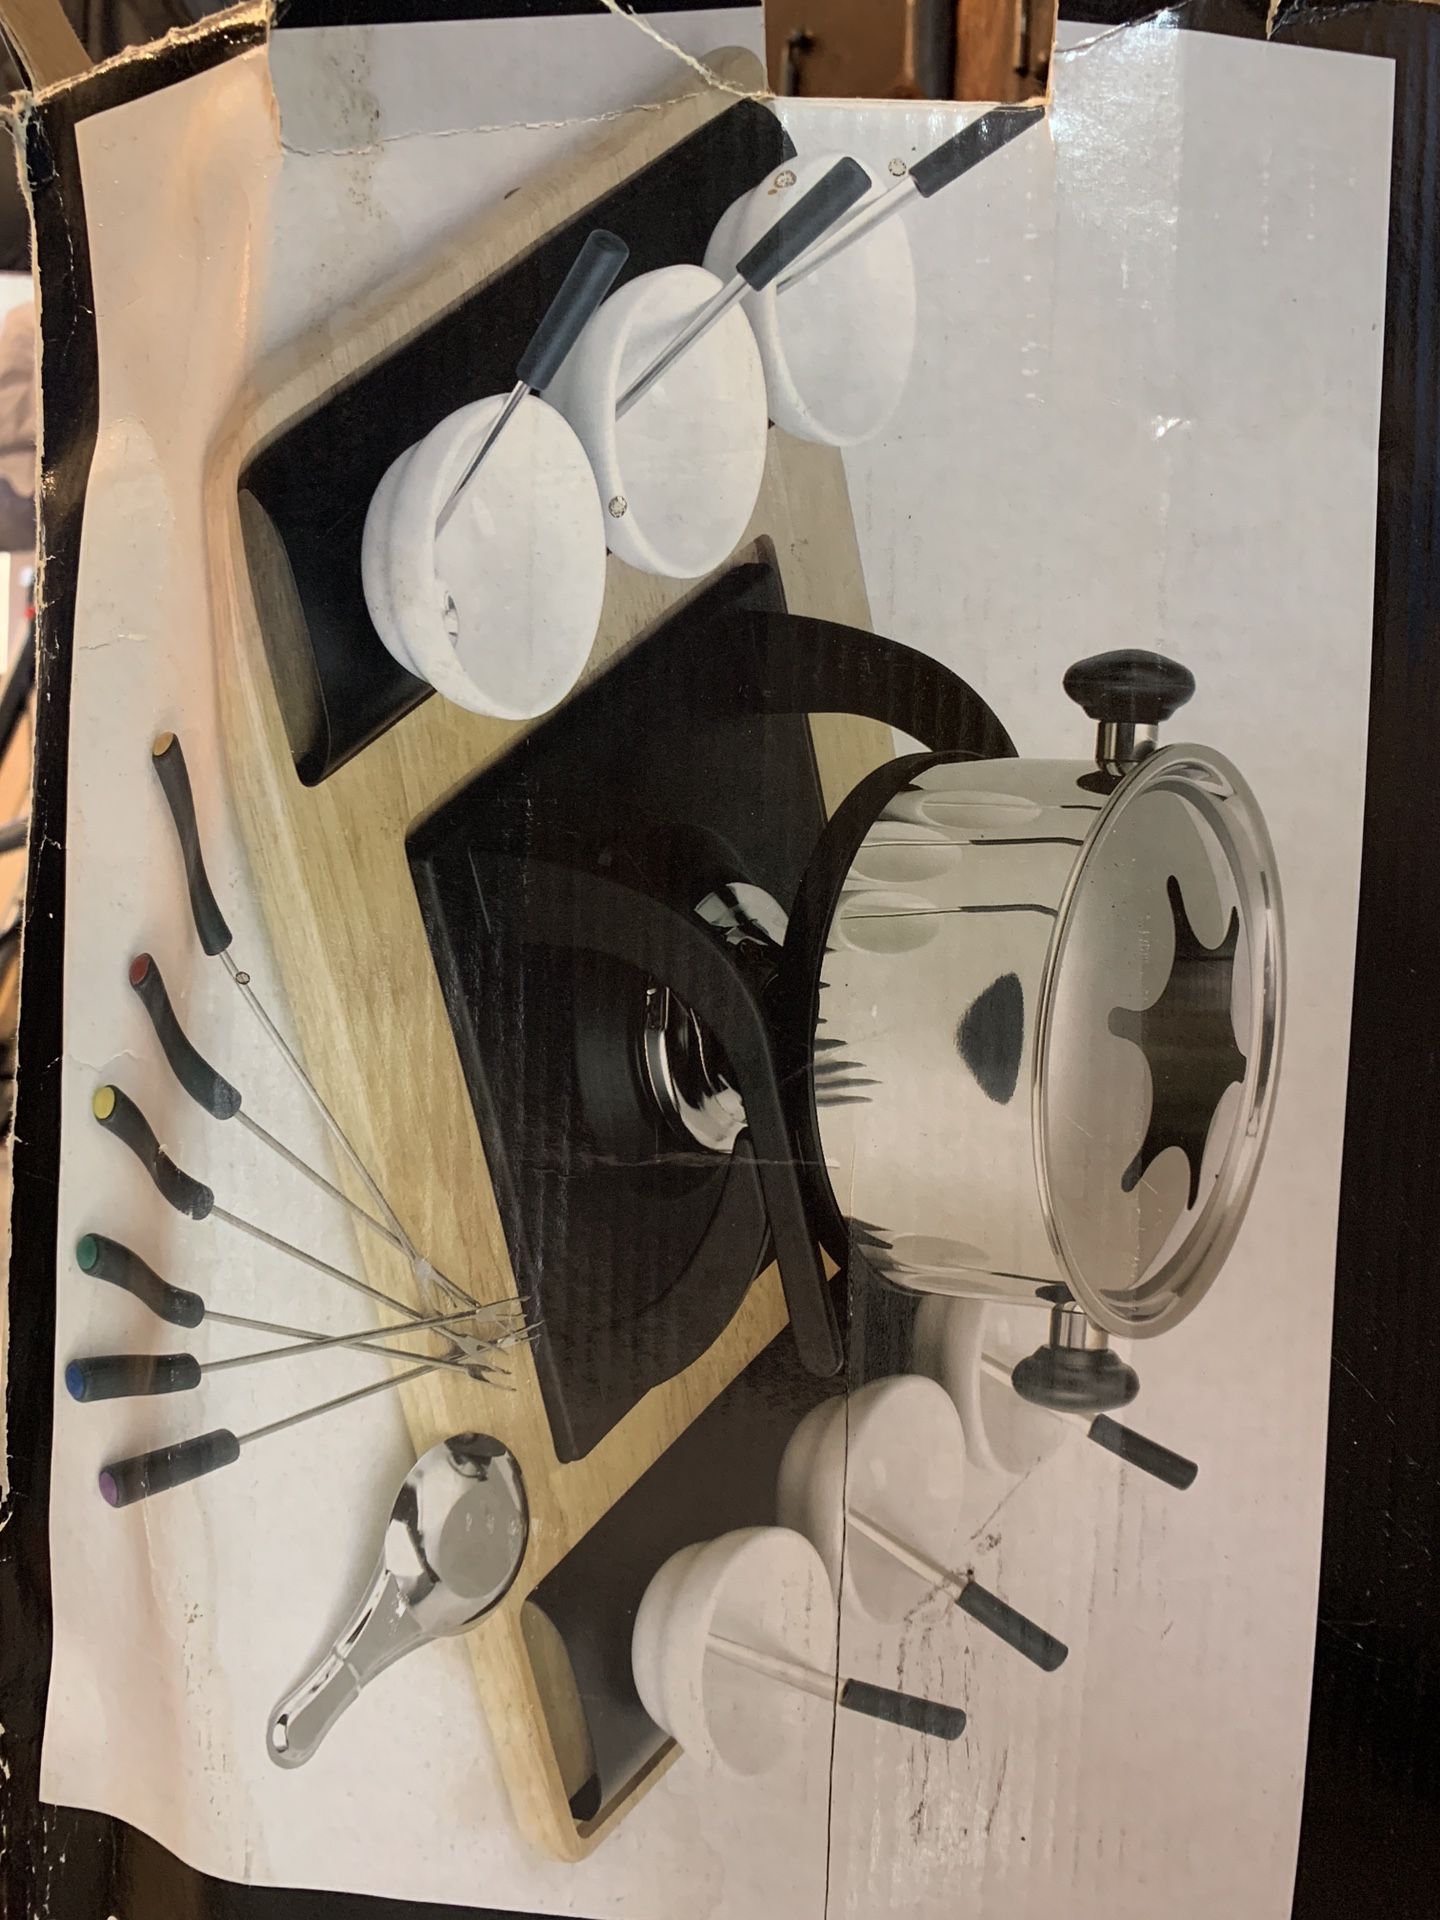 Serve at home 26-piece Deluxe Fondue Set - NEW UNOPENED